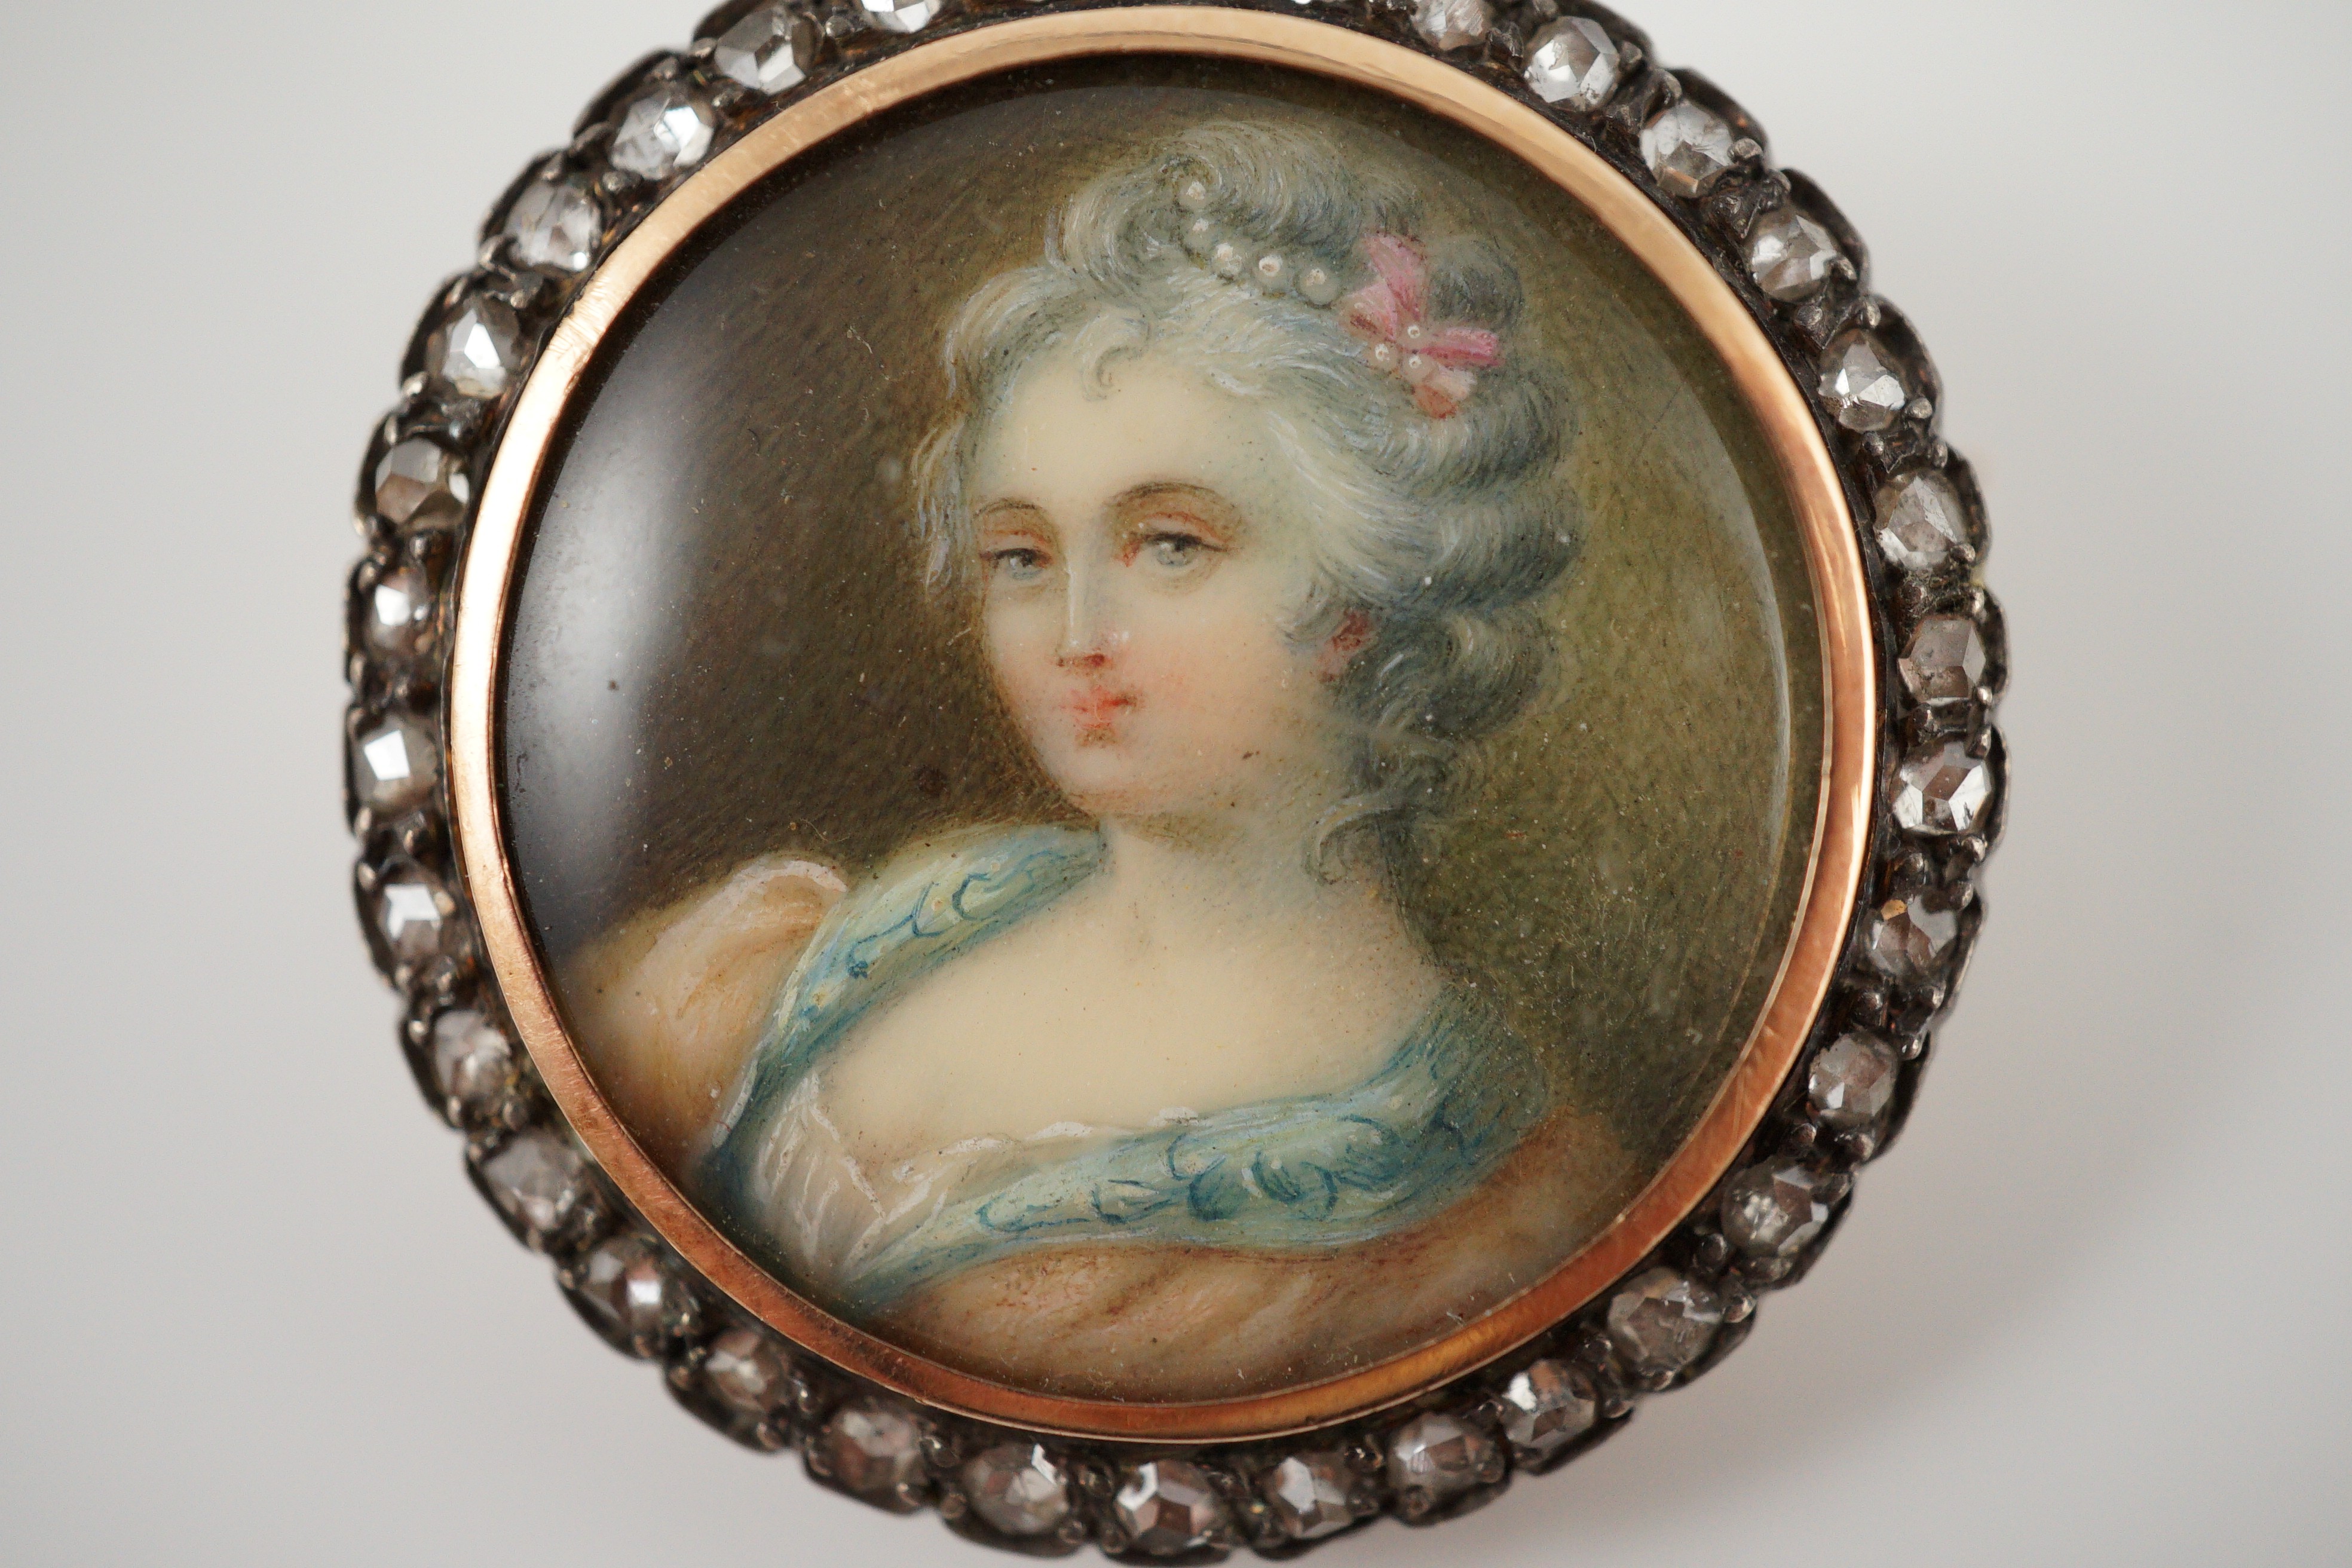 An Edwardian diamond set circular gold brooch with inset miniature portrait bust of a lady